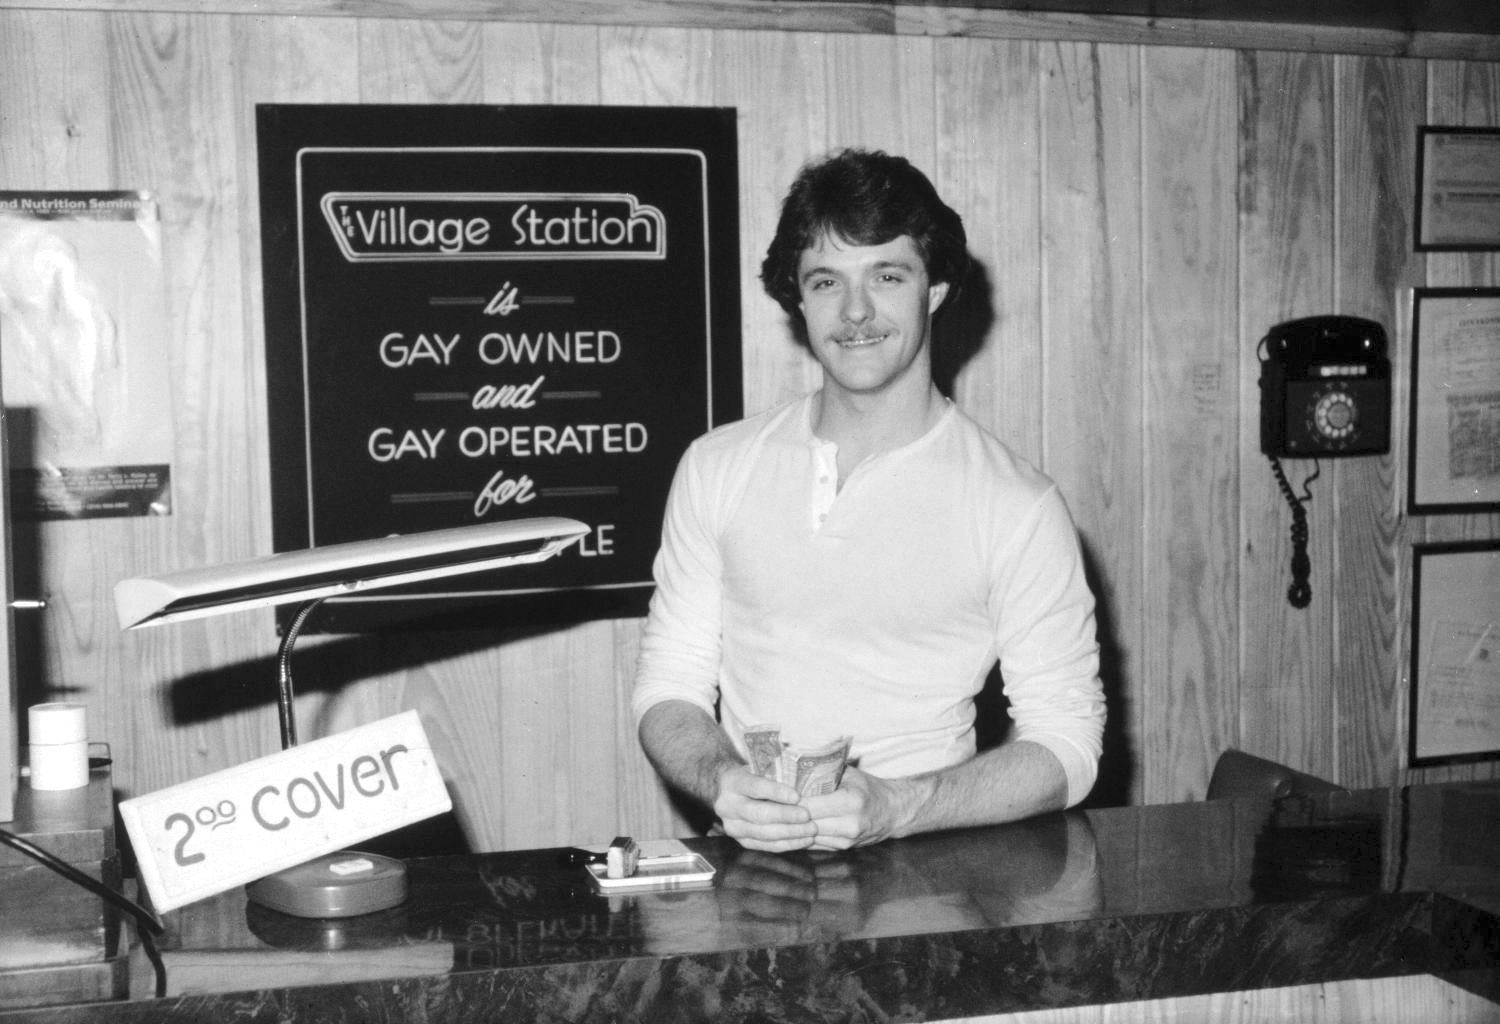 In Dallas' Village Station, a pre-Lawrence gay club, a smiling white man in a long-sleeve white shirt stands behind a counter, holding a handful of $1 bills. A sign behind him reads "Village Station is Gay Owned and Gay Operated for Gay People". Another sign proclaims that there is a $2 cover. An old fashioned lamp is on the counter and an old rotary phone on the wall.